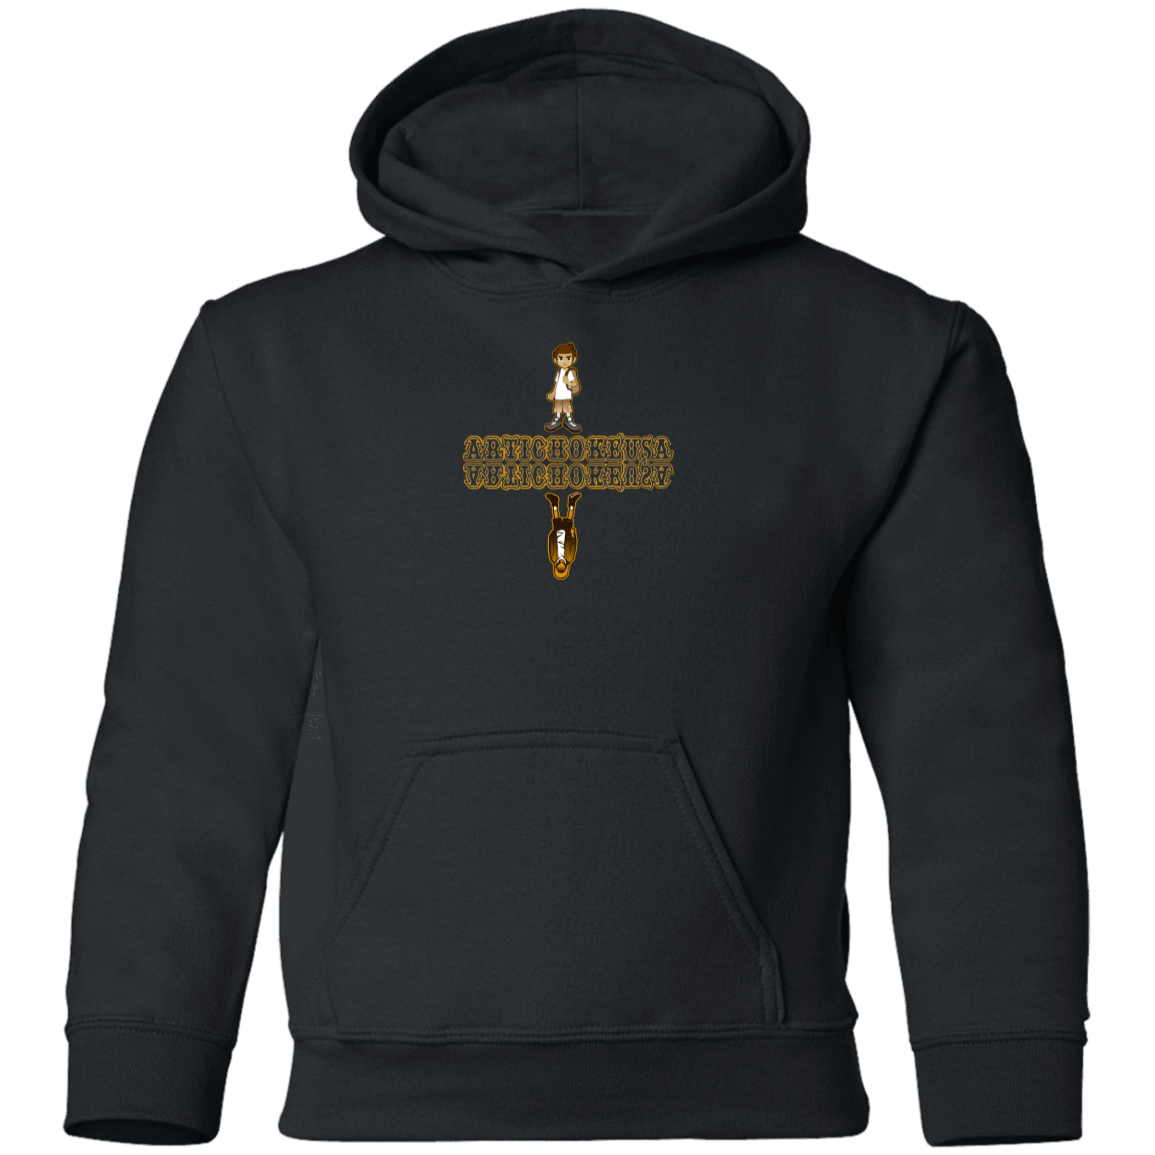 ArtichokeUSA Custom Design. Façade: (Noun) A false appearance that makes someone or something seem more pleasant or better than they really are. Youth Pullover Hoodie